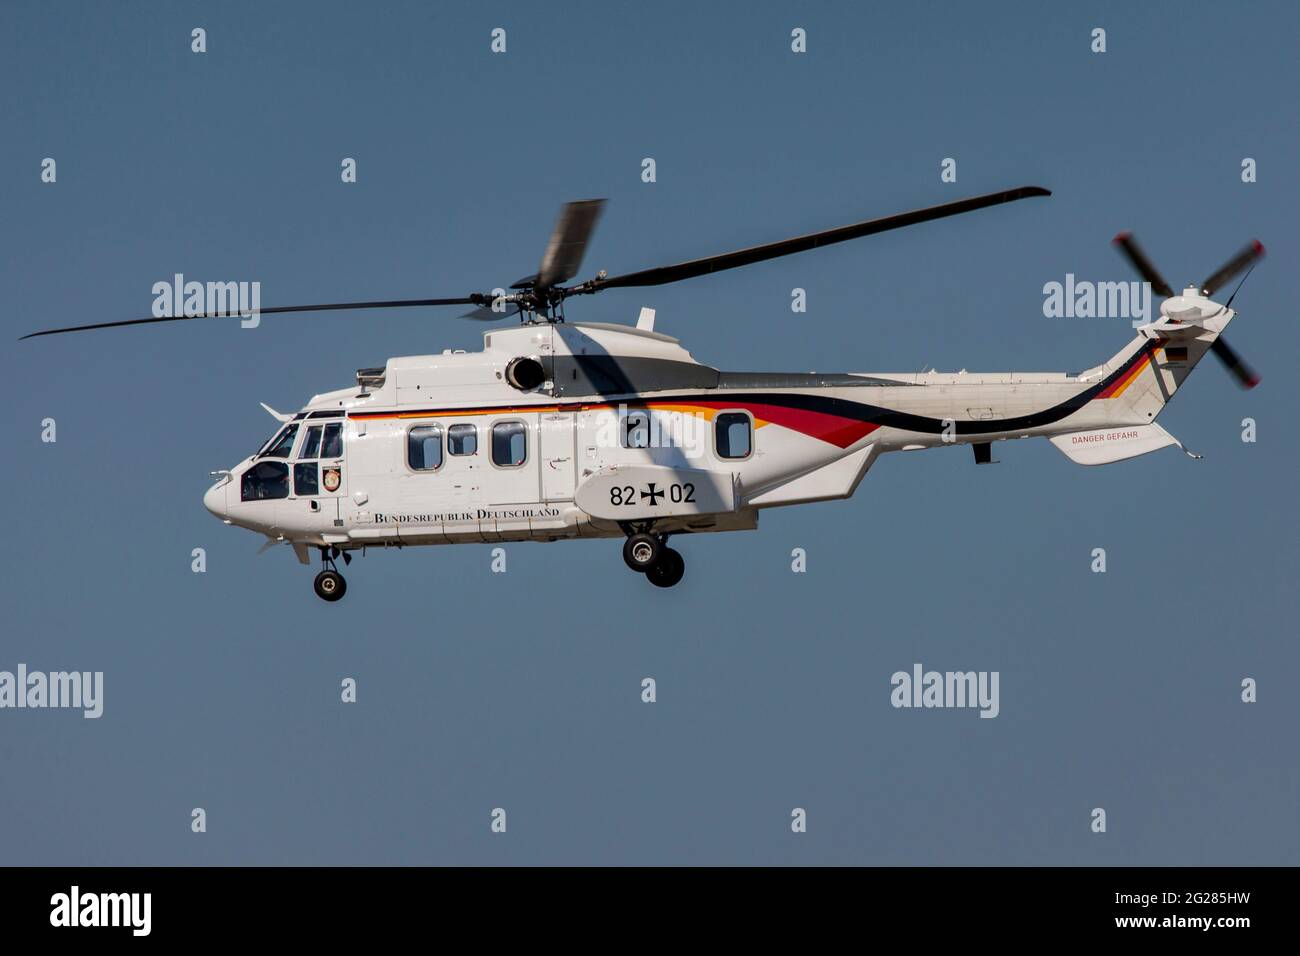 German Air Force Cougar helicopter in new color scheme Stock Photo - Alamy